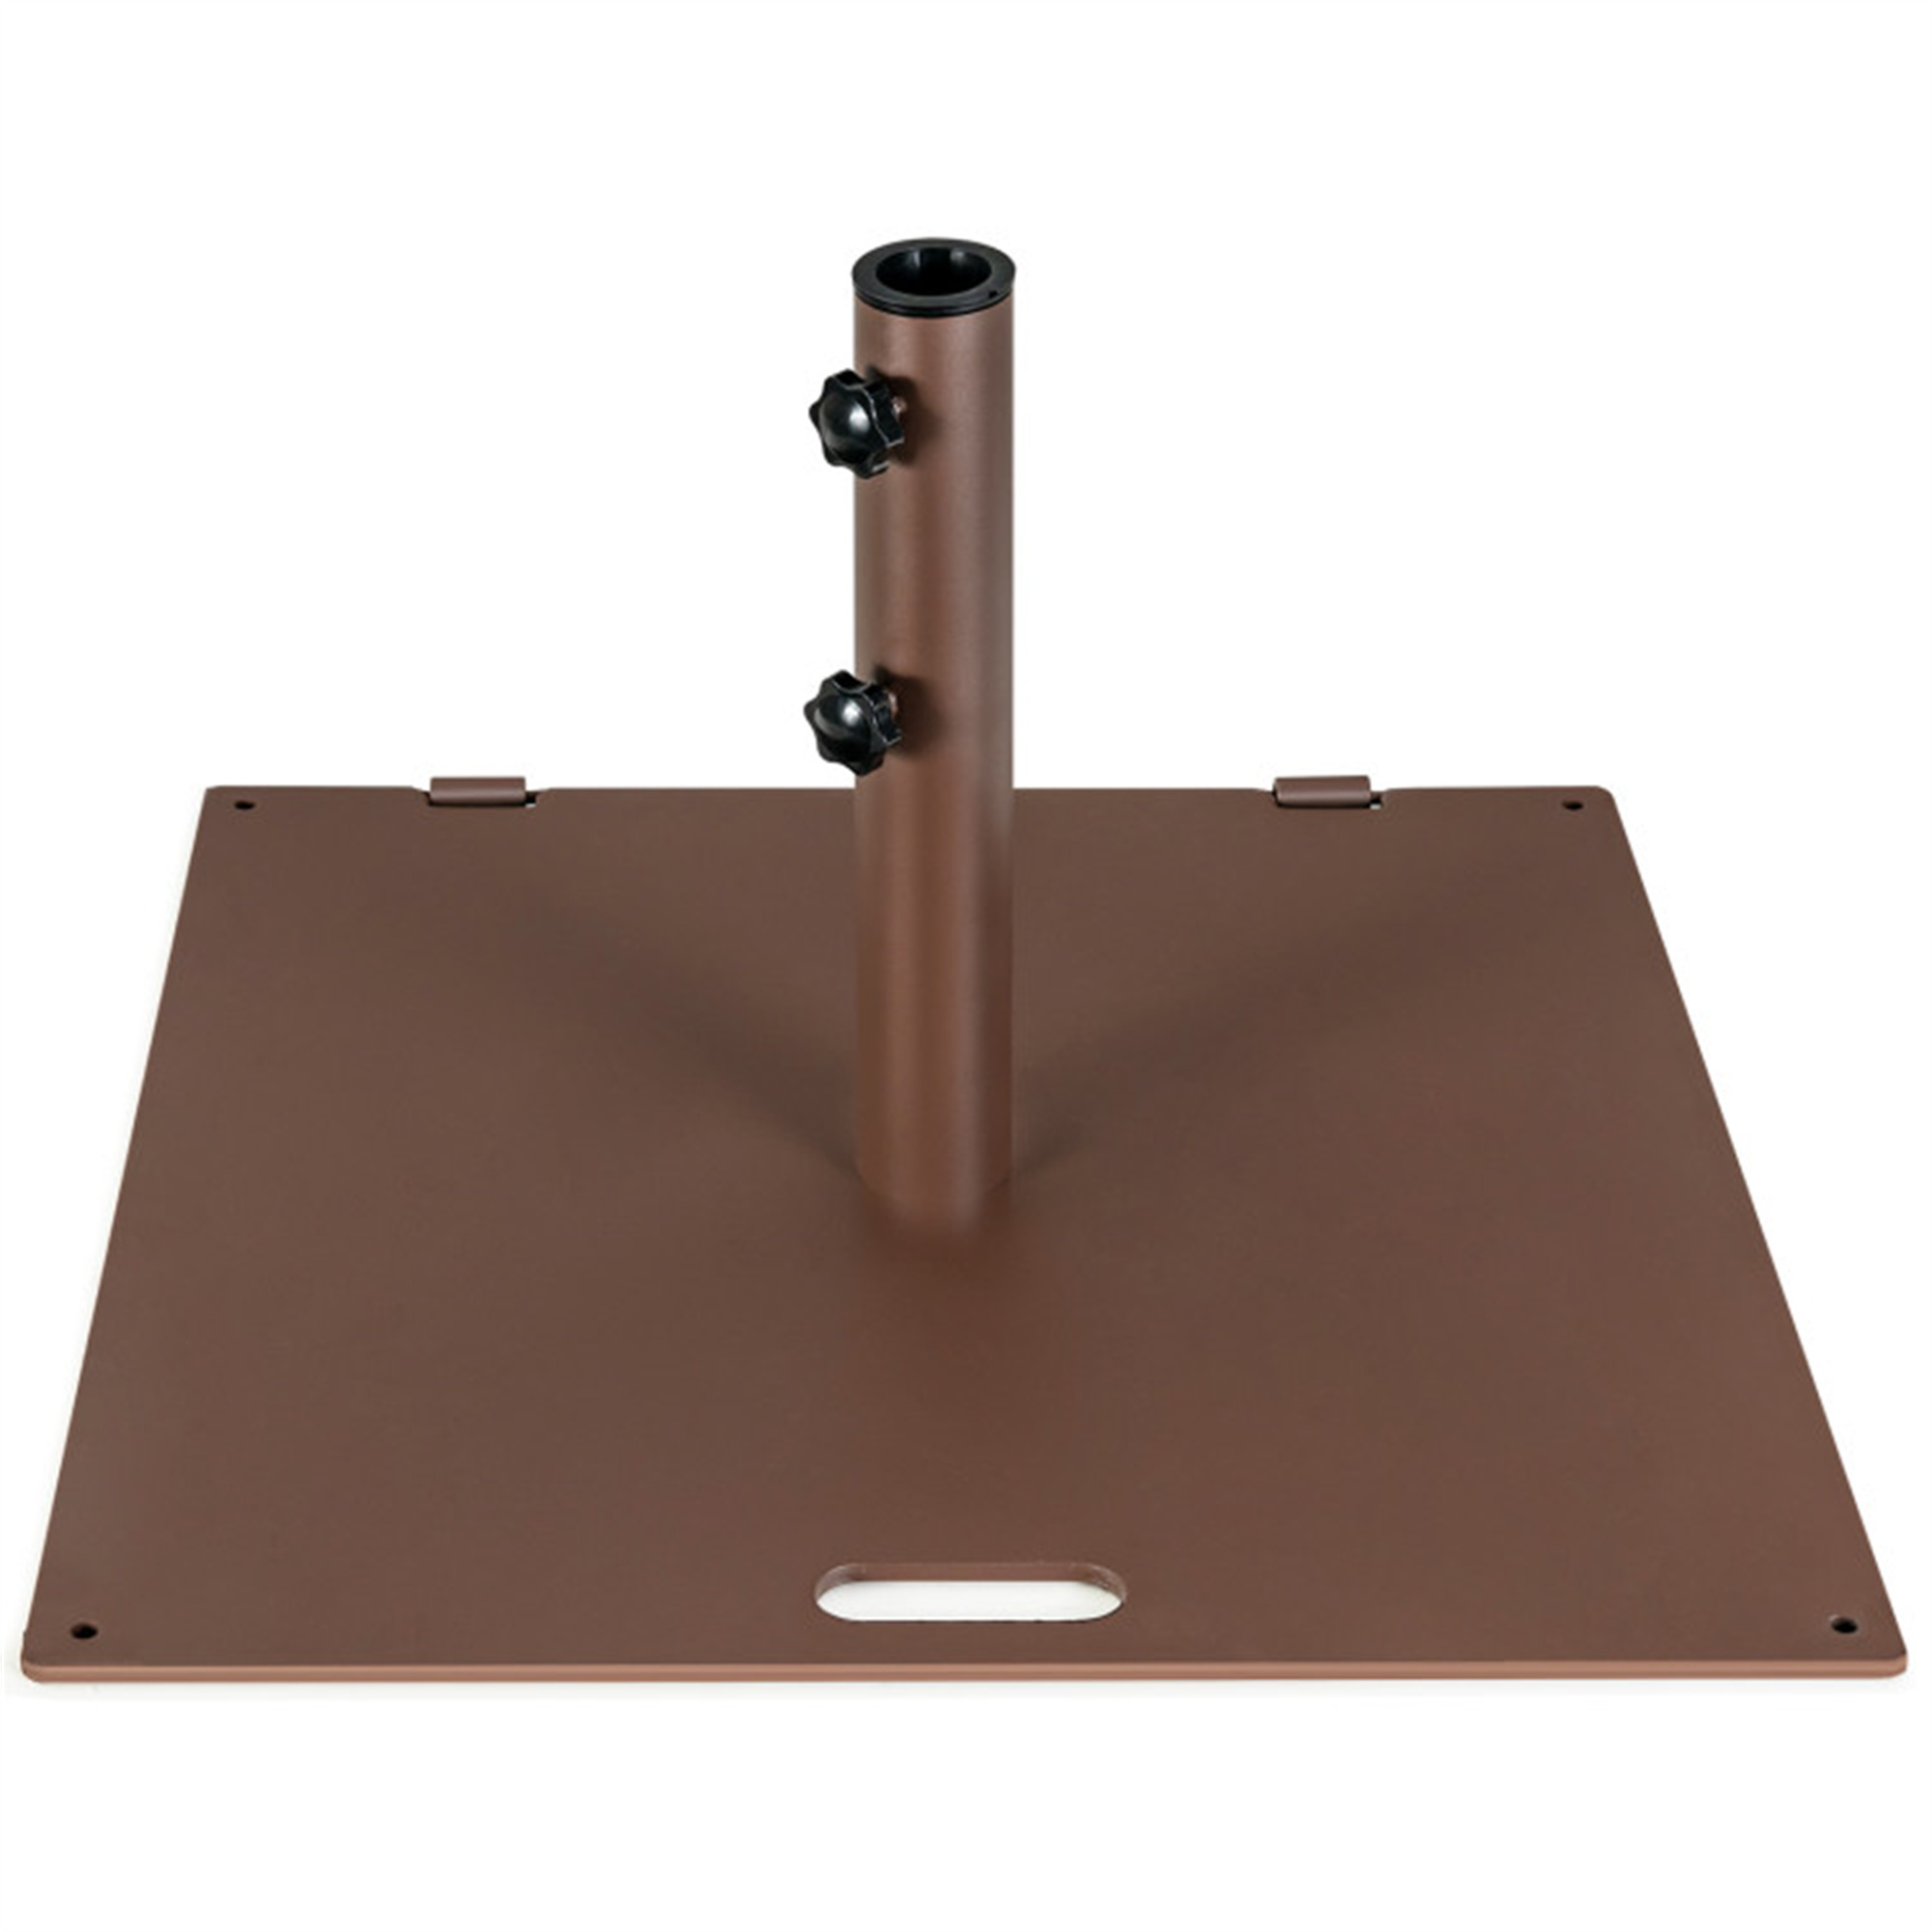 50 LBS Weighted 24 Inch Square Patio Umbrella Base